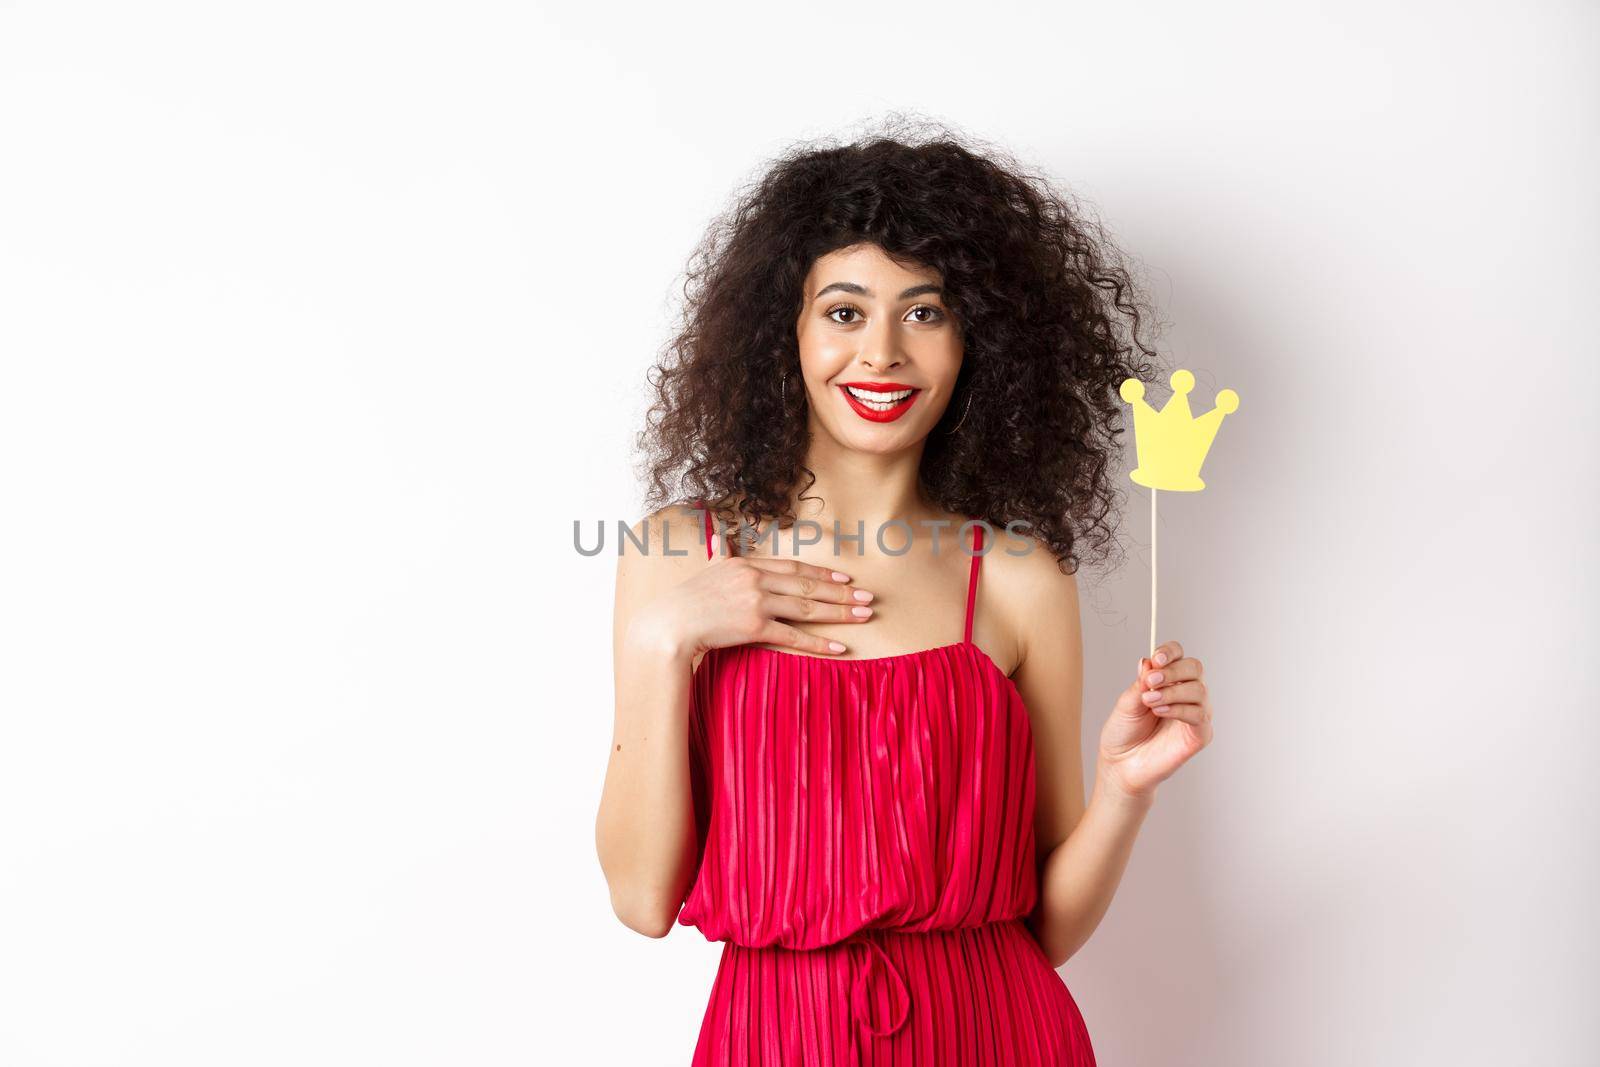 Confident pretty lady in red dress, holding queen crown on stick and looking excited, standing on white background.